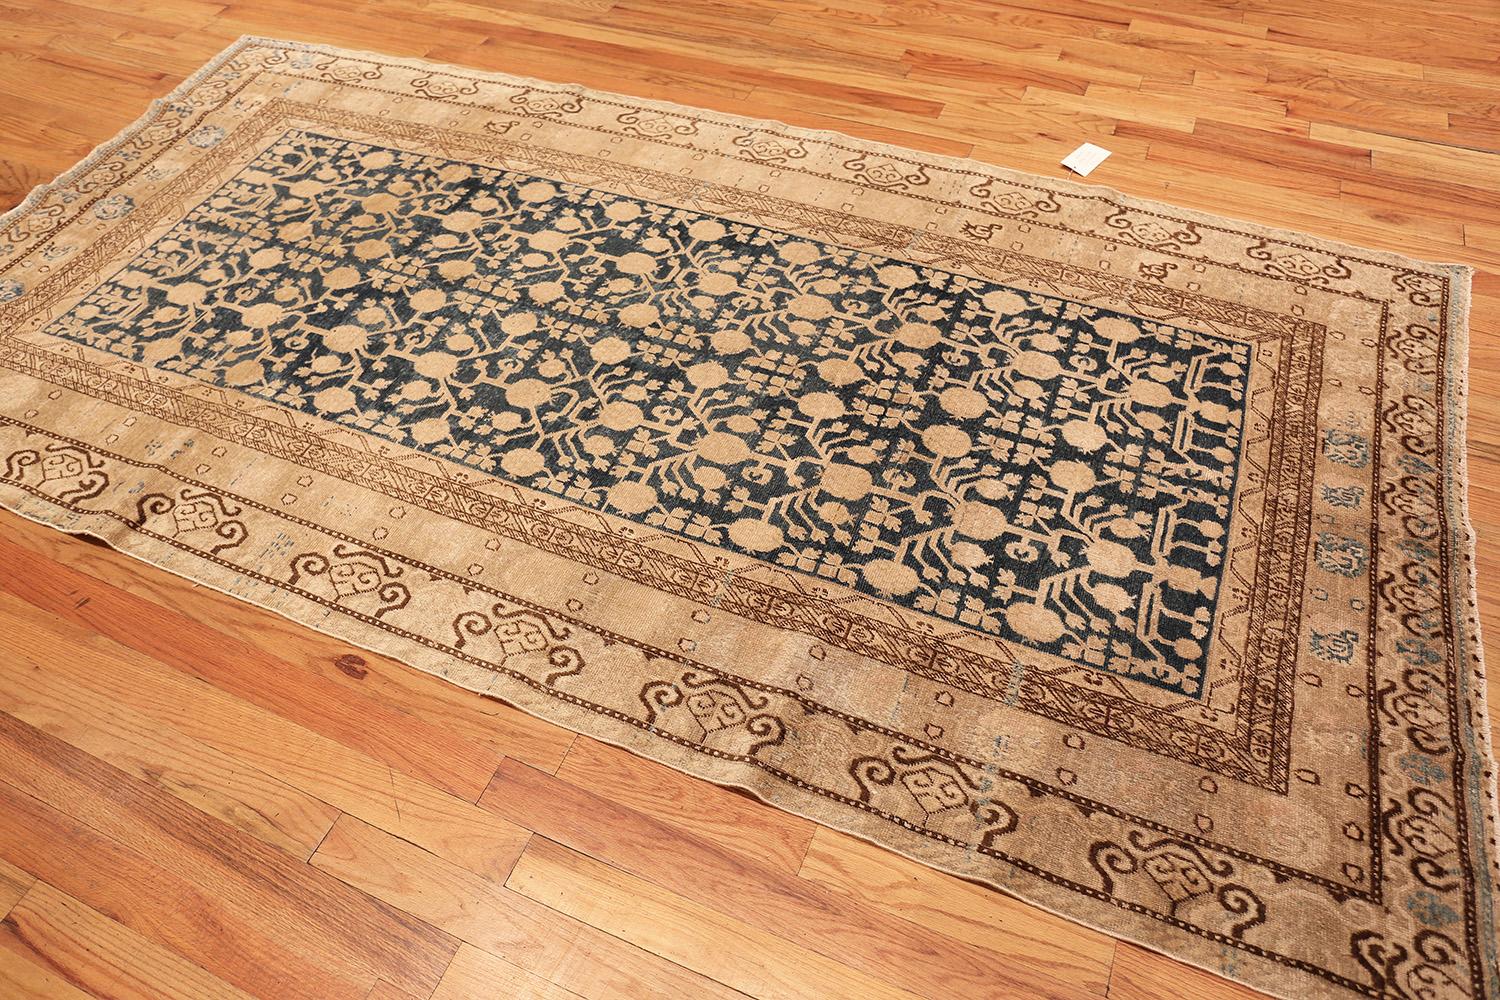 Wool Antique Blue Pomegranate Khotan Rug. Size: 5 ft 7 in x 10 ft 6 in